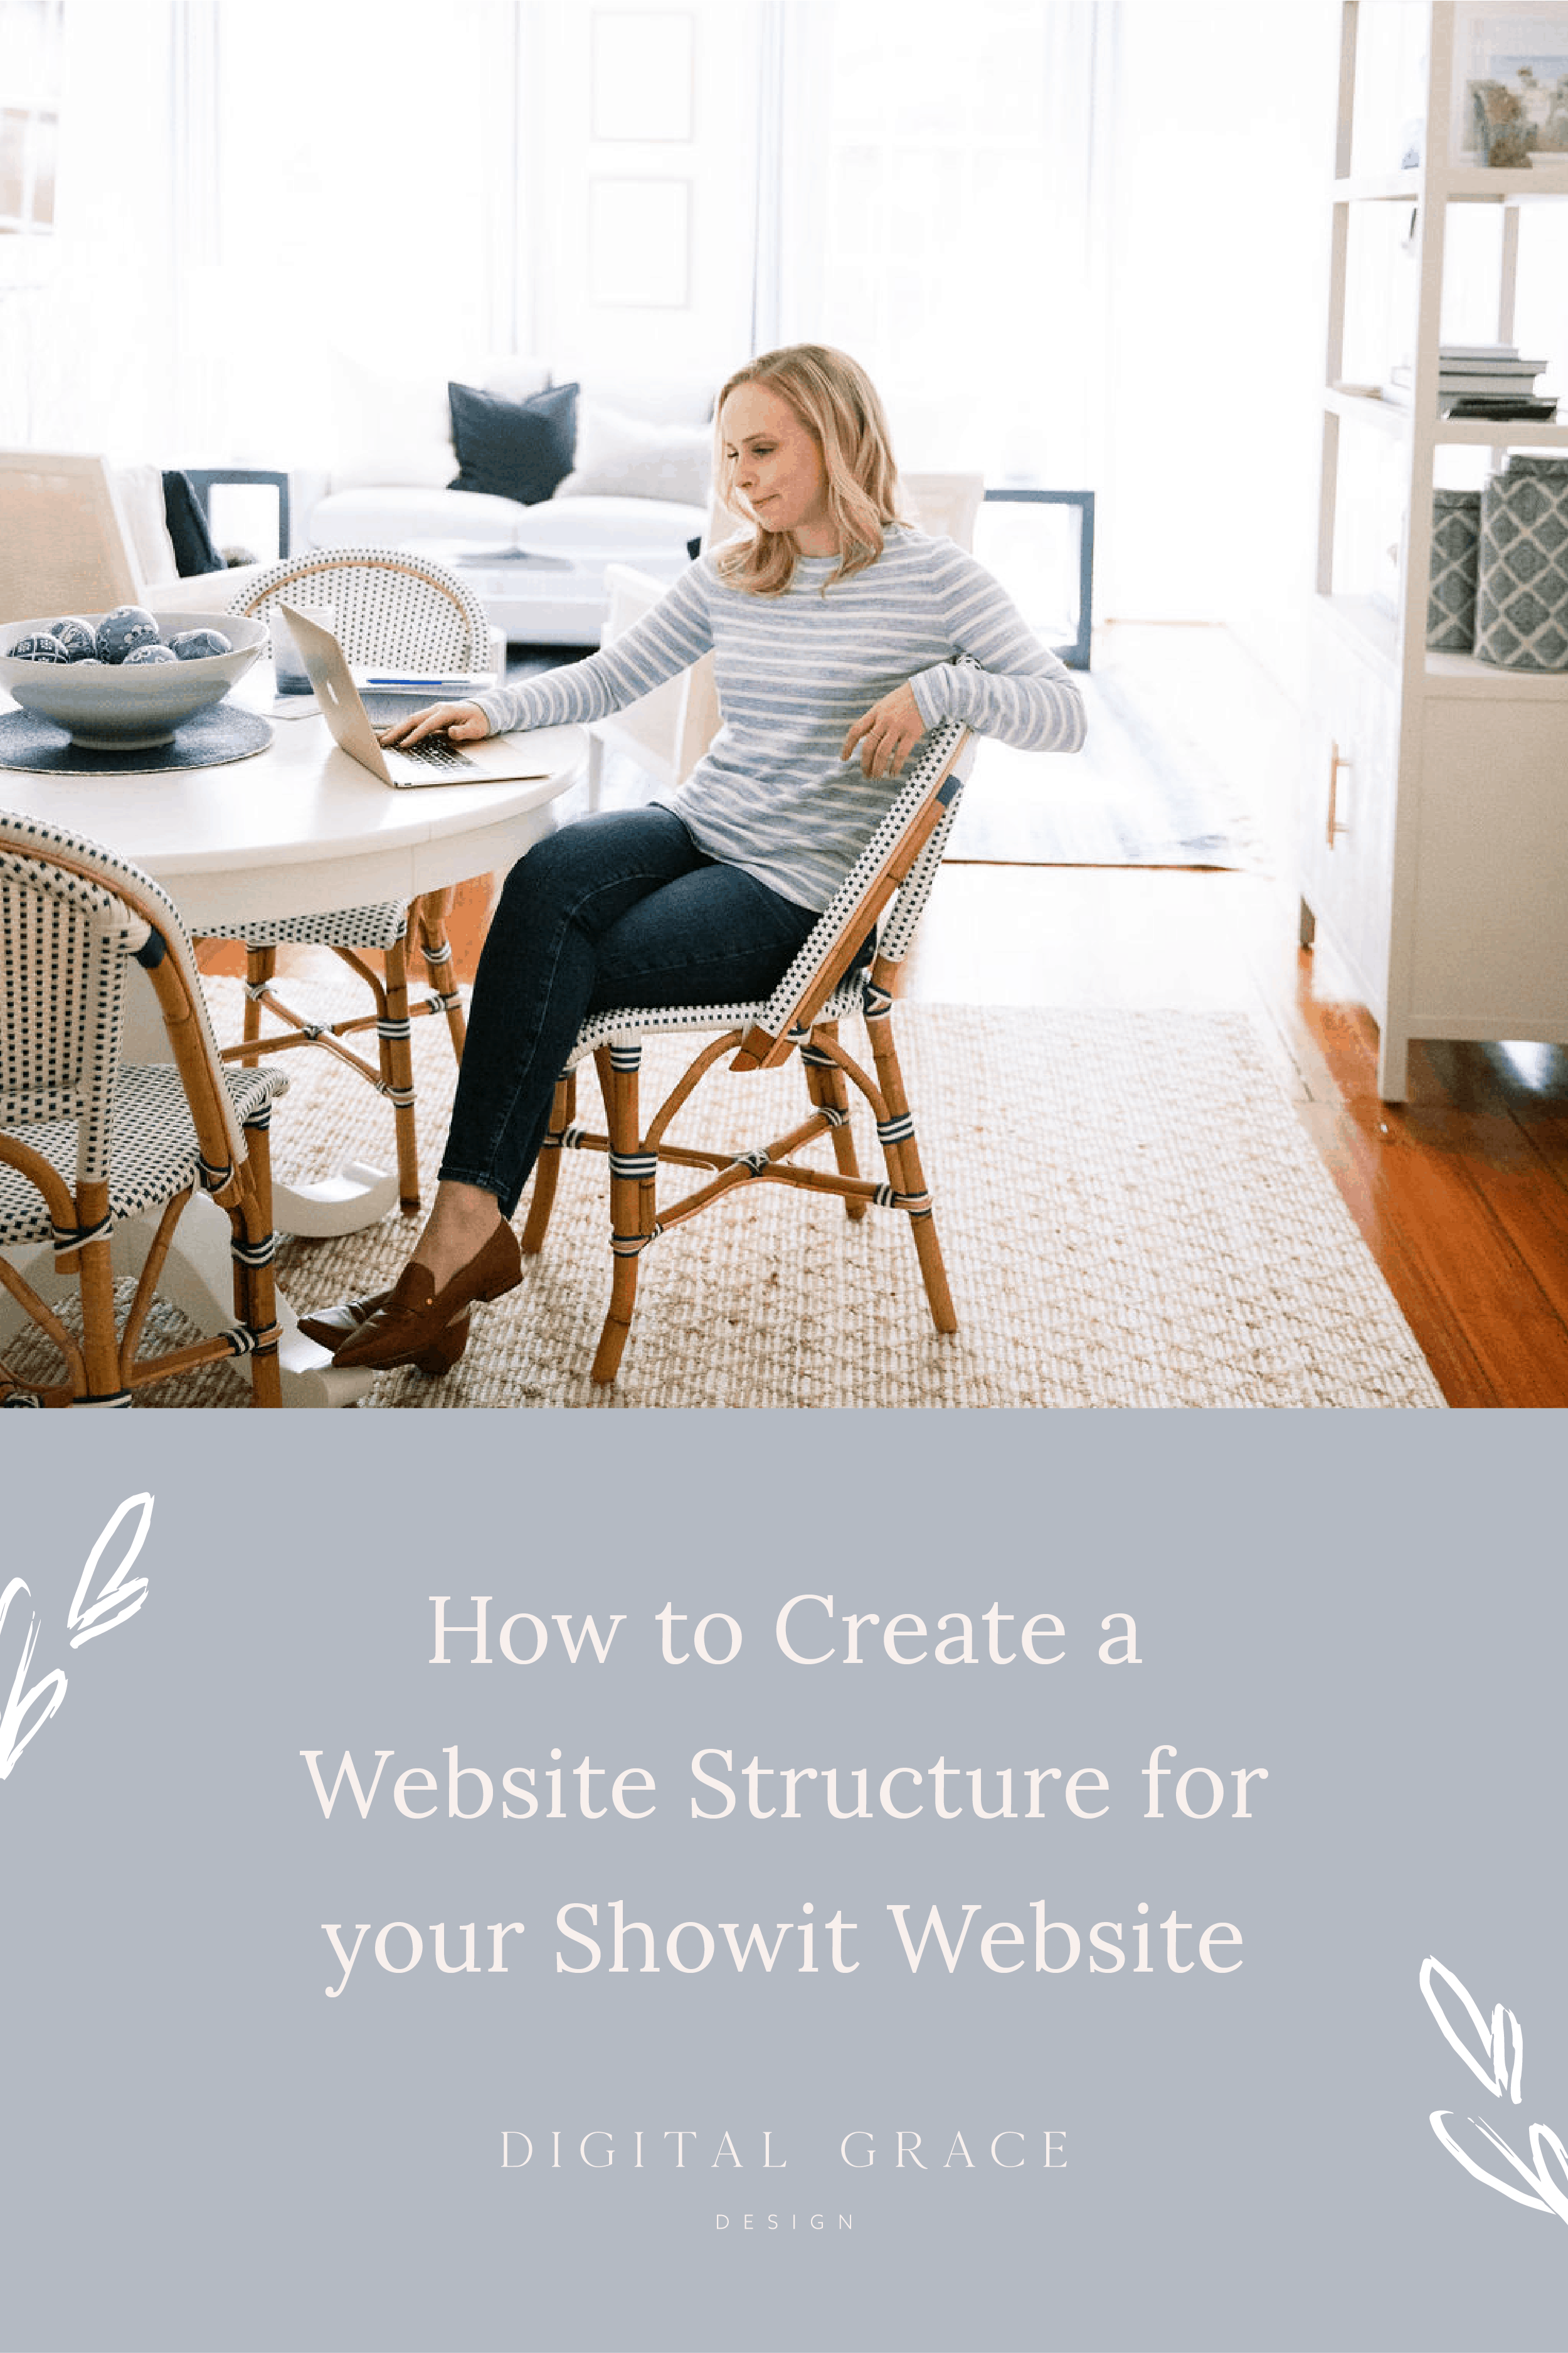 How to Create a Website Structure for your Showit Website